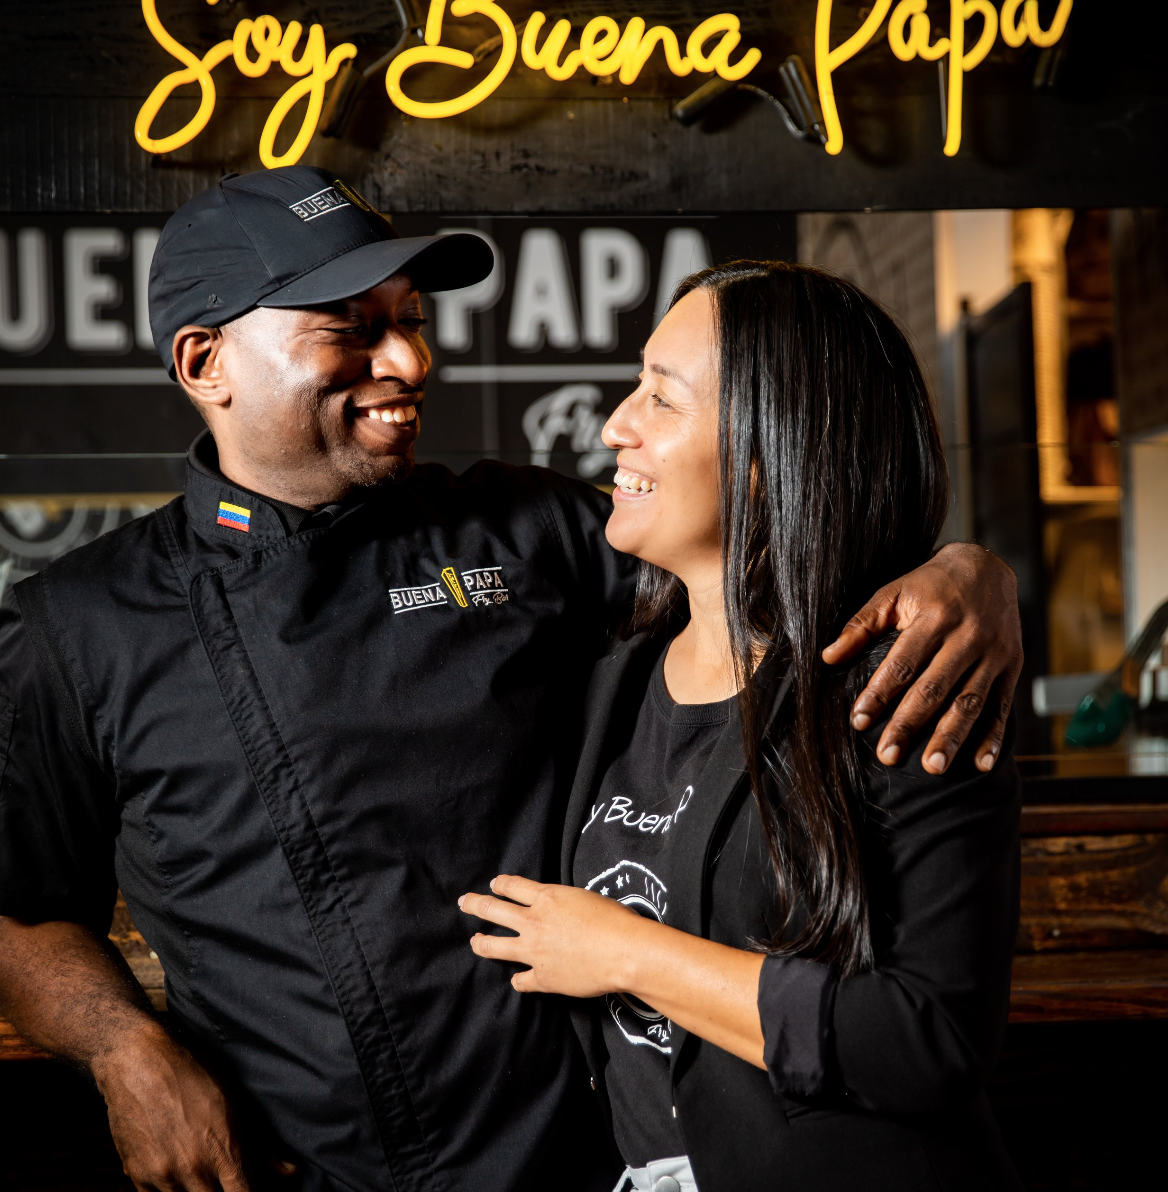 Buena Papa Fry Bar strikes $400K deal with Robert Herjavec on “Shark Tank” for 19 per cent of Black-owned restaurant chain